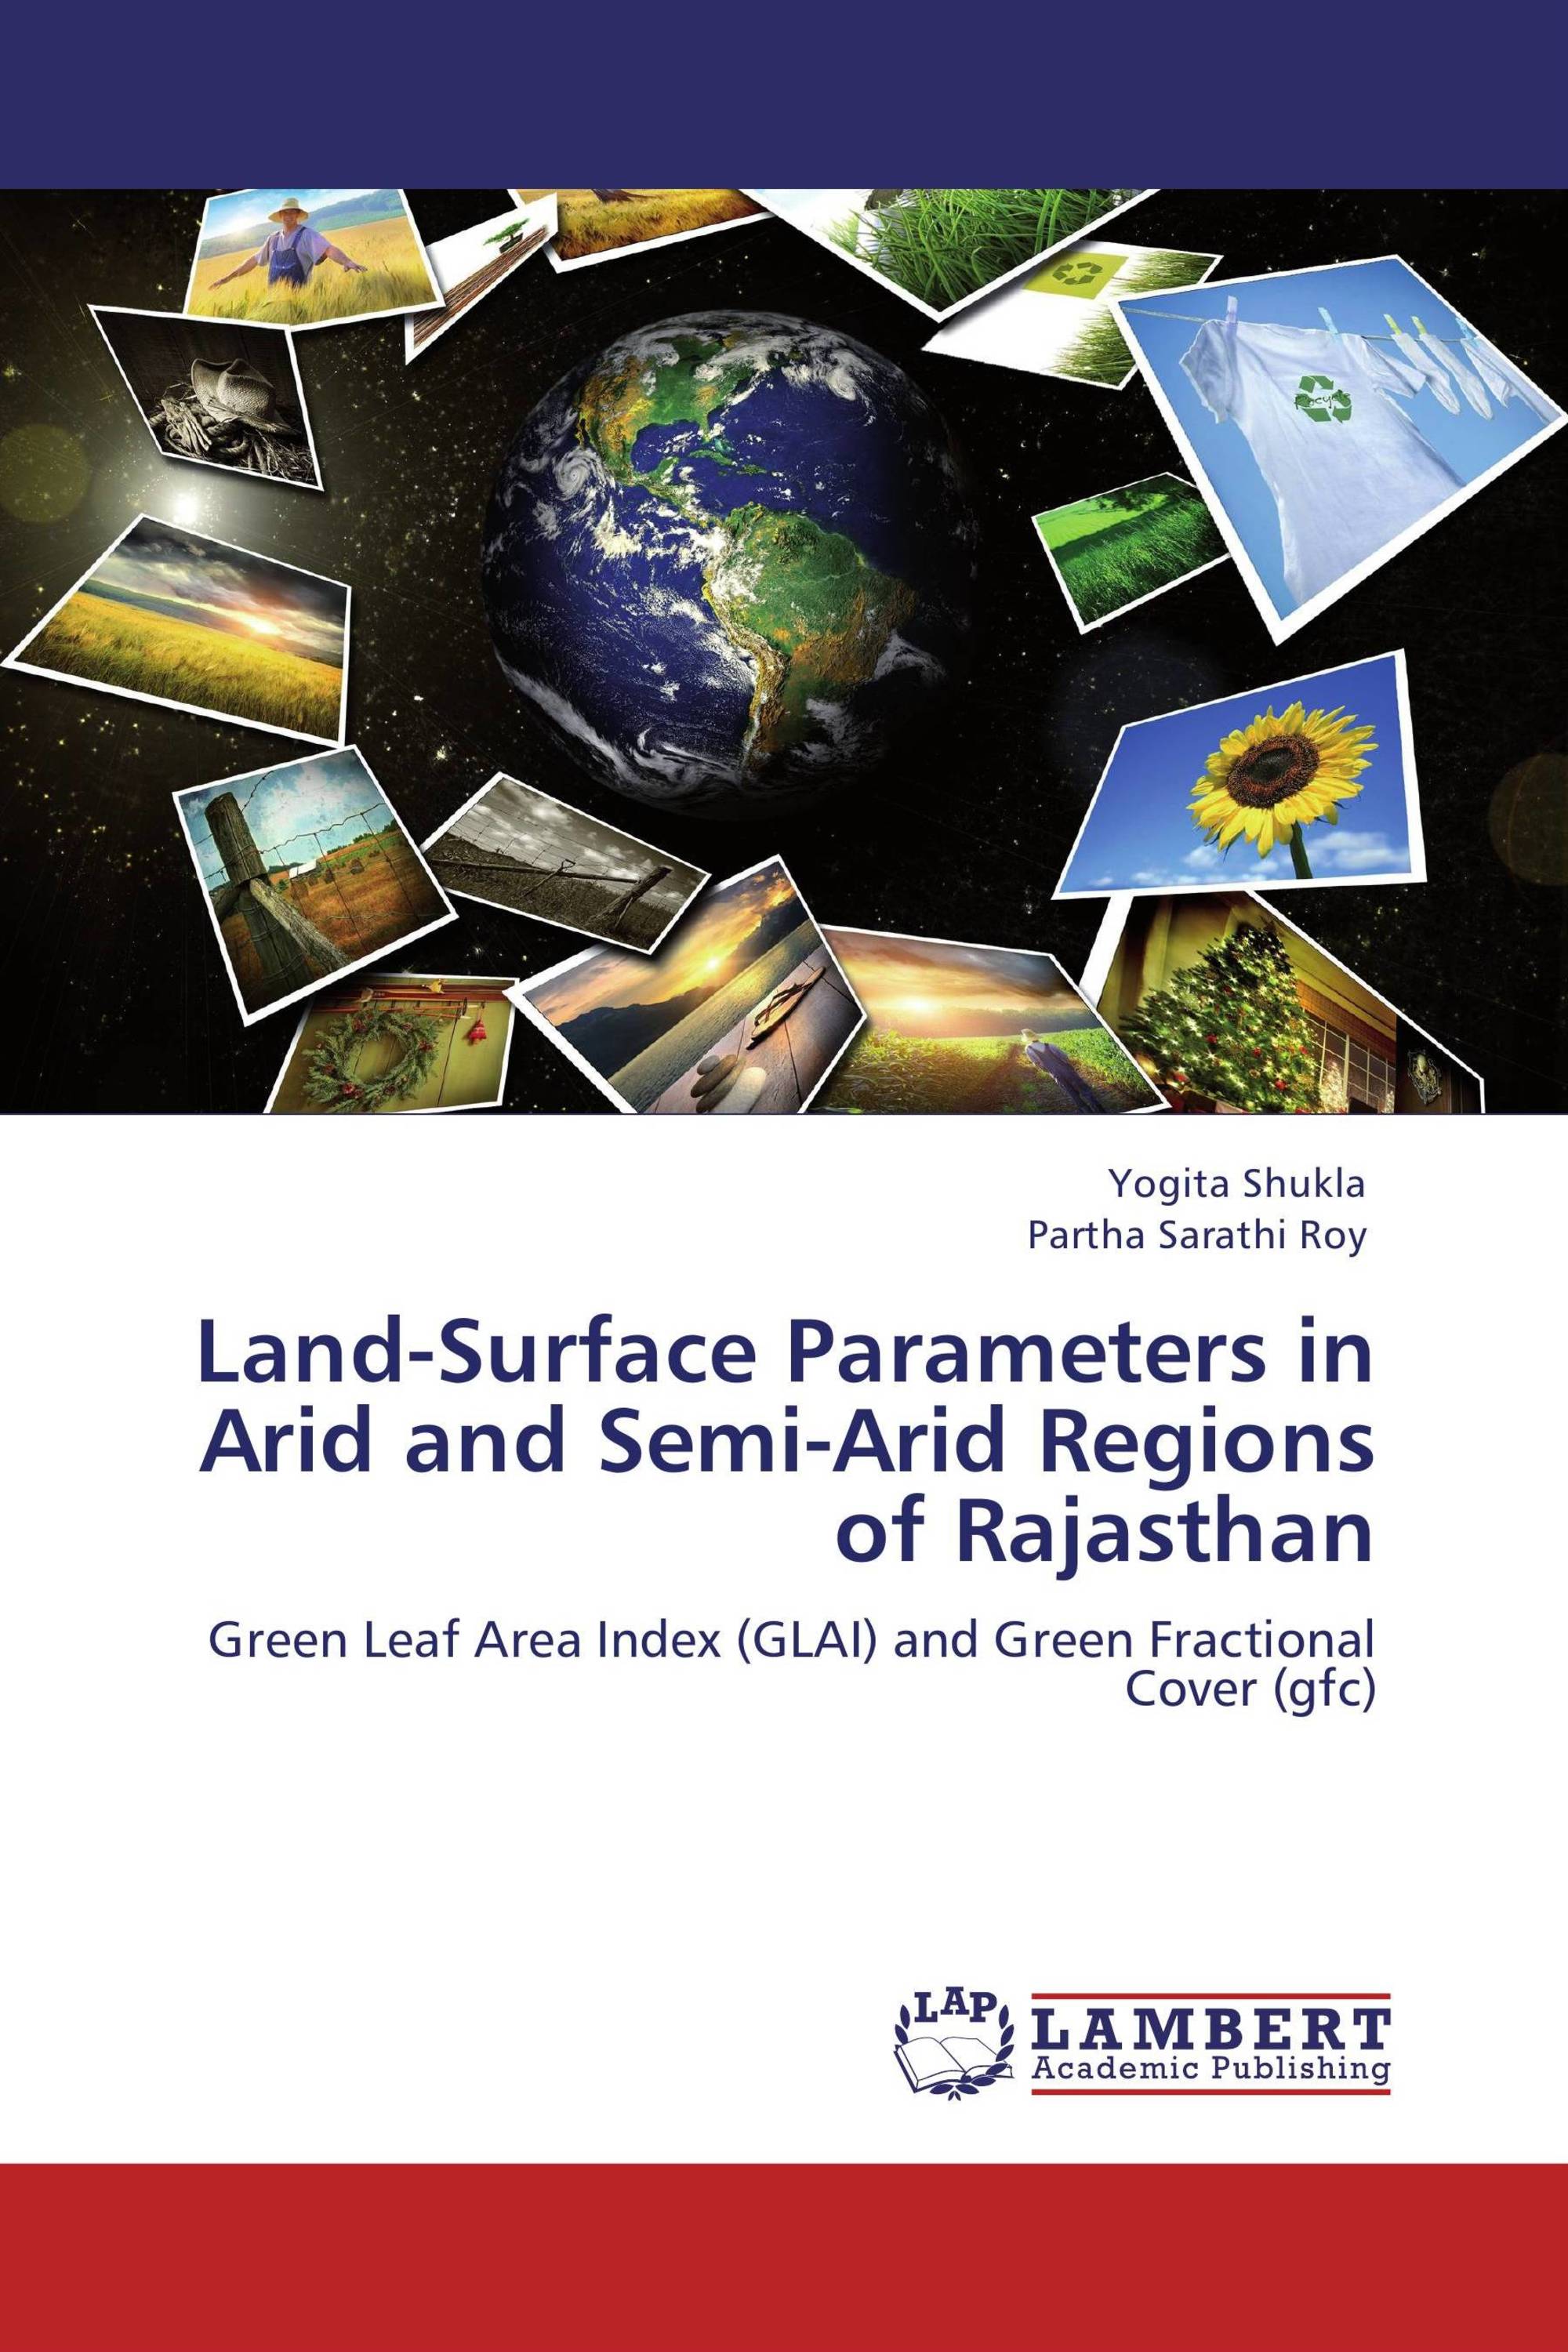 Land-Surface Parameters in Arid and Semi-Arid Regions of Rajasthan